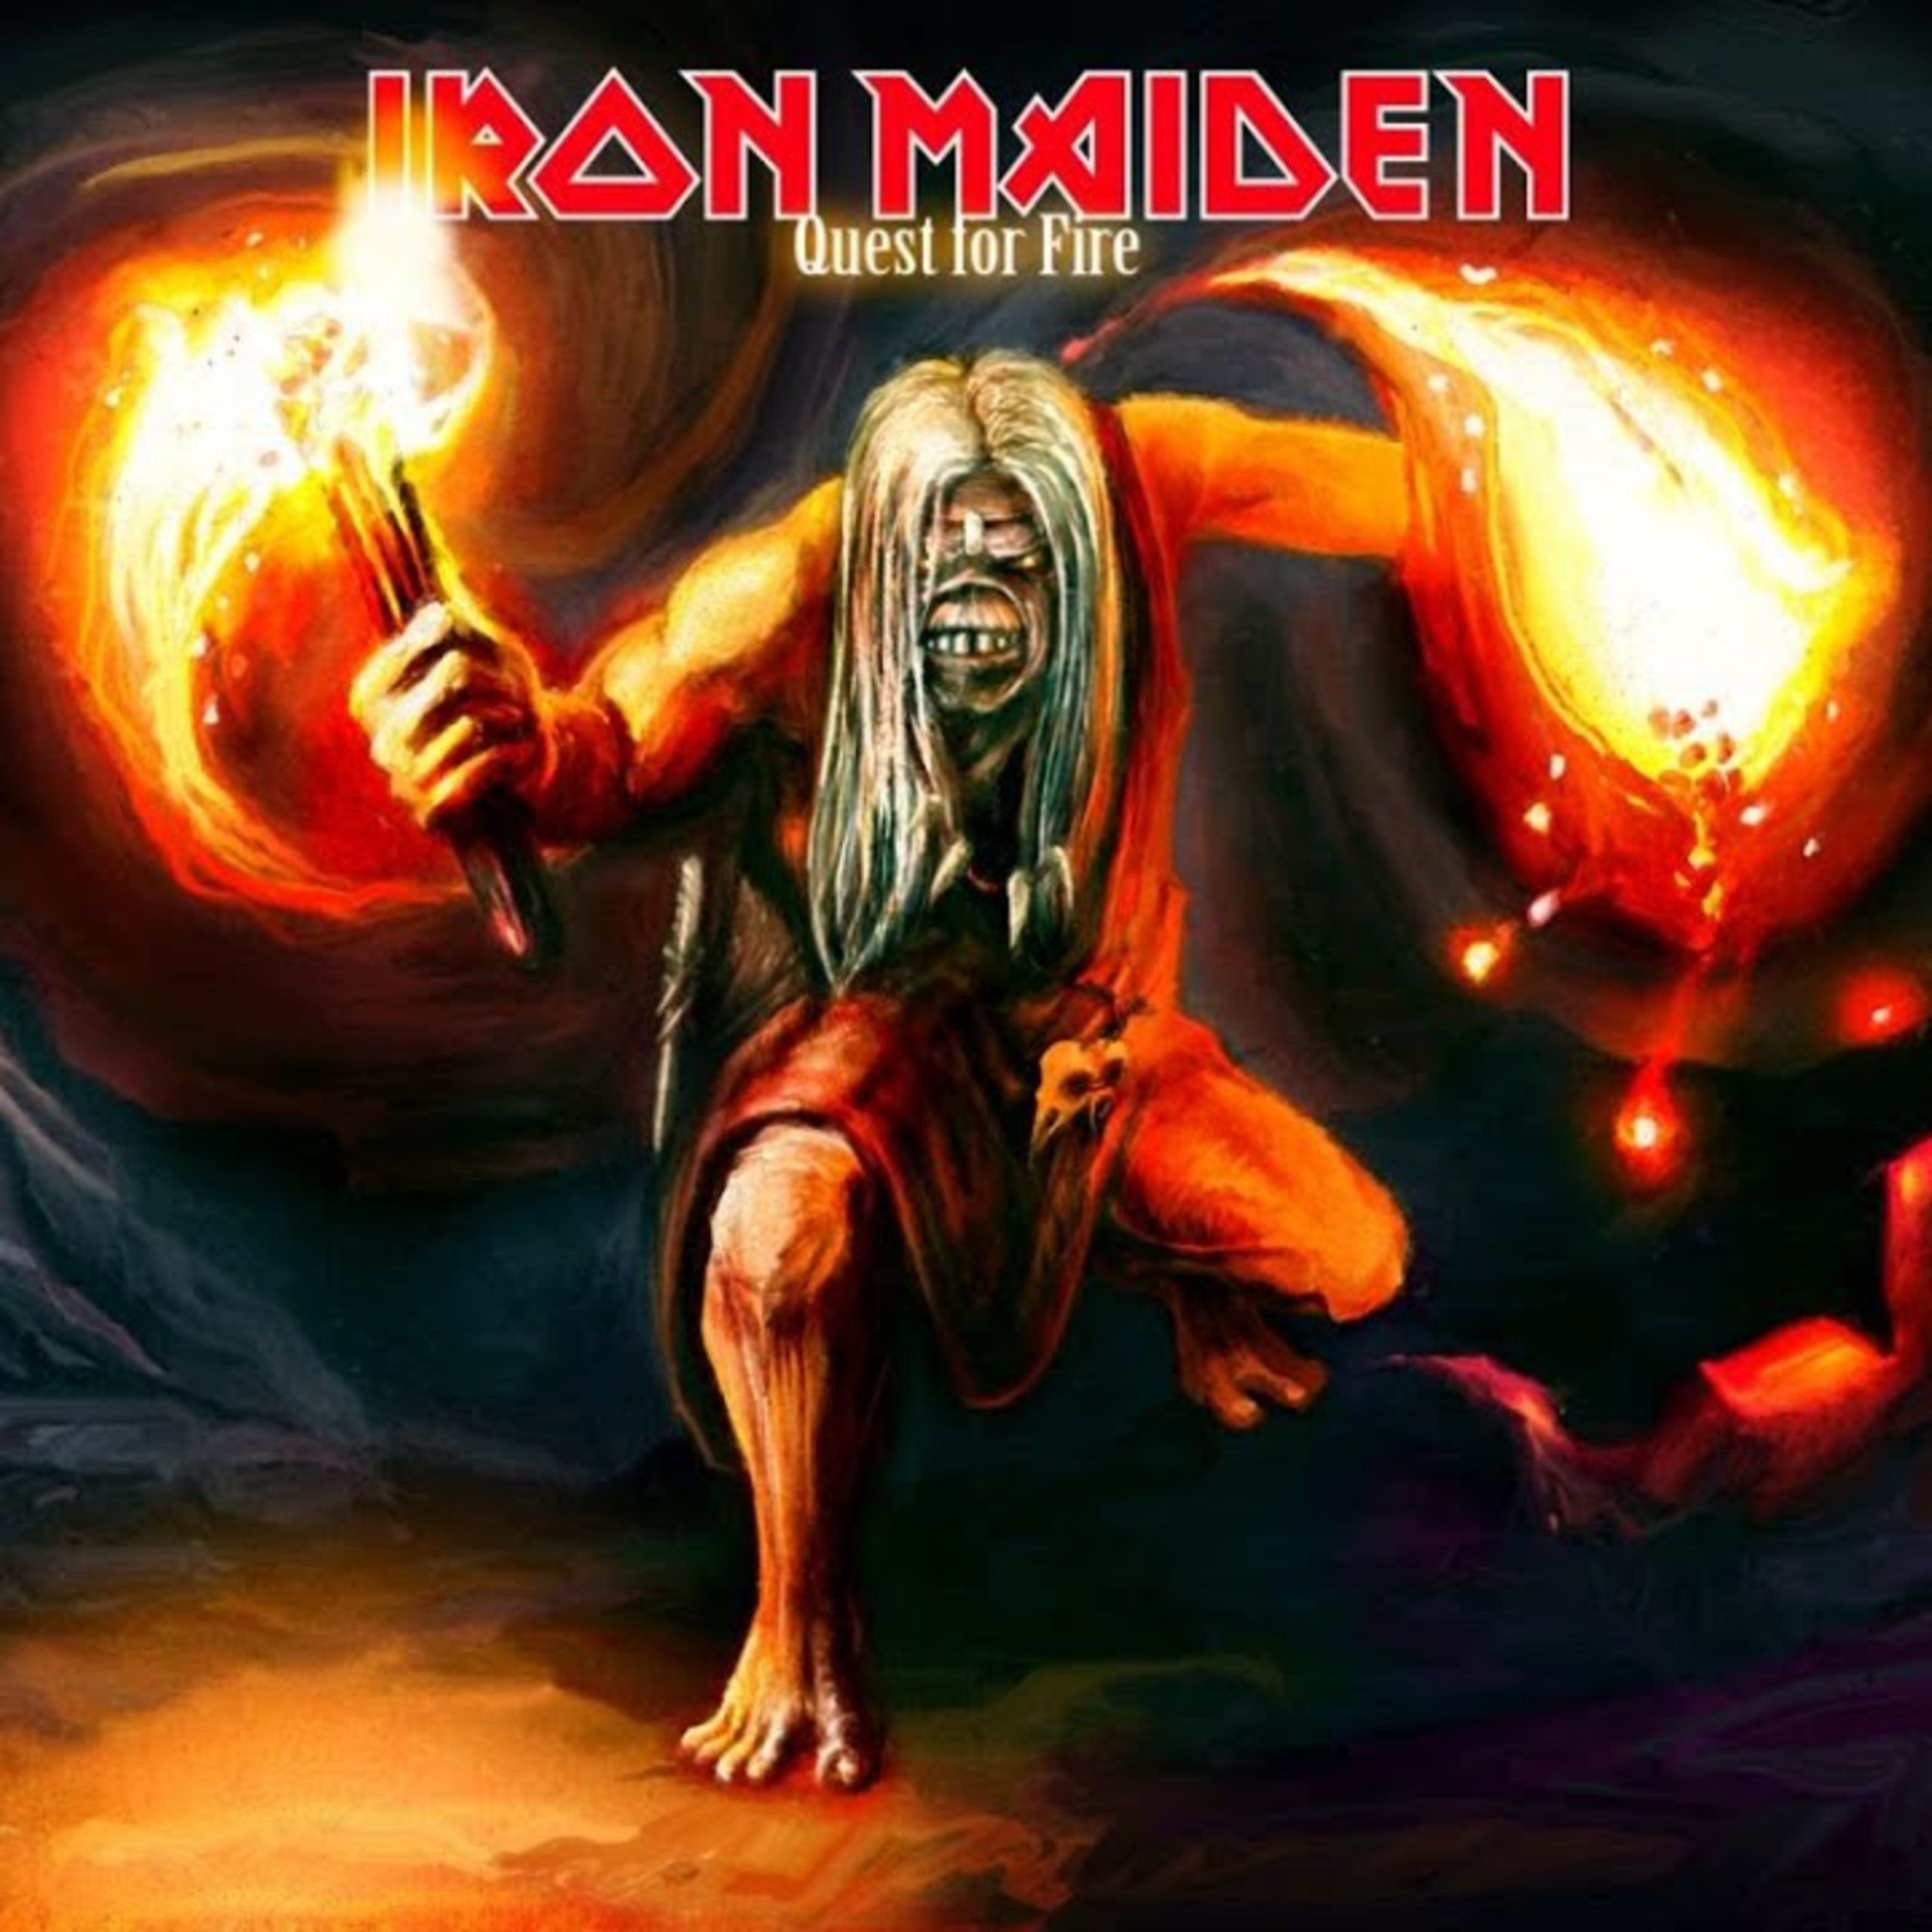 PCTD Episode 33: IRON MAIDEN’s “Quest for Fire” [HRHM]